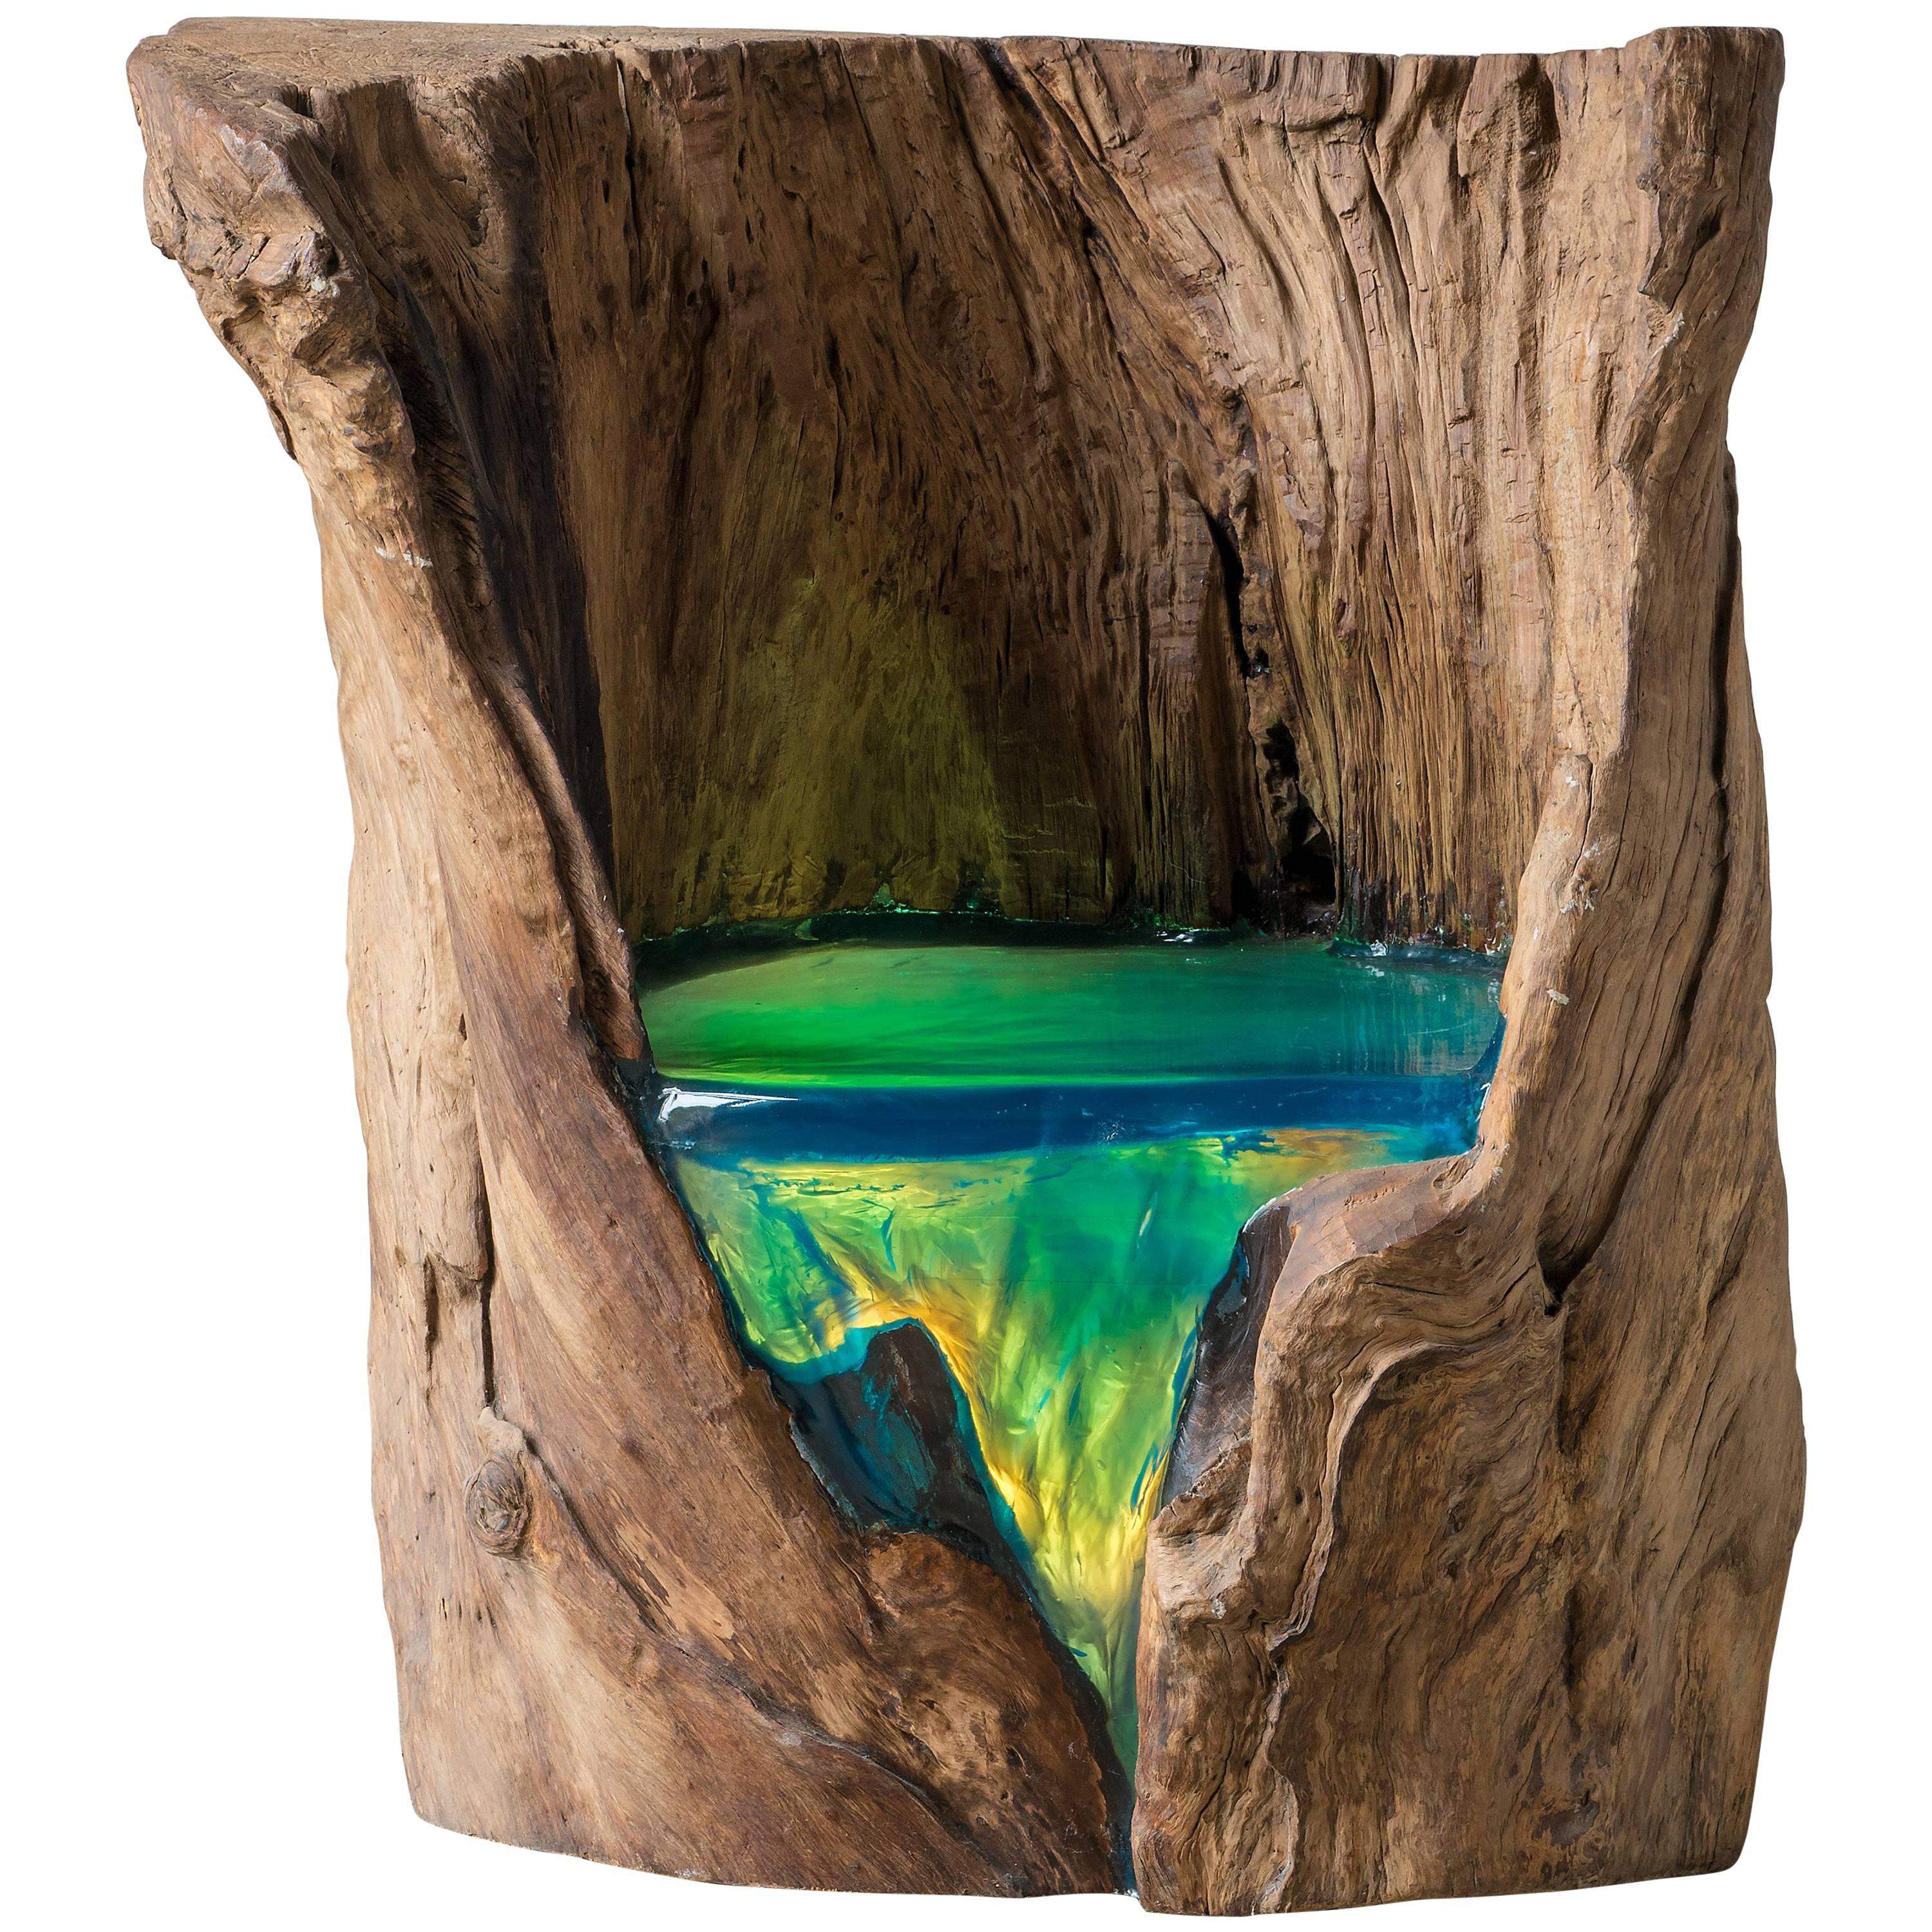 Organic Olive Tree Chair Made of Stump and Resin For Sale